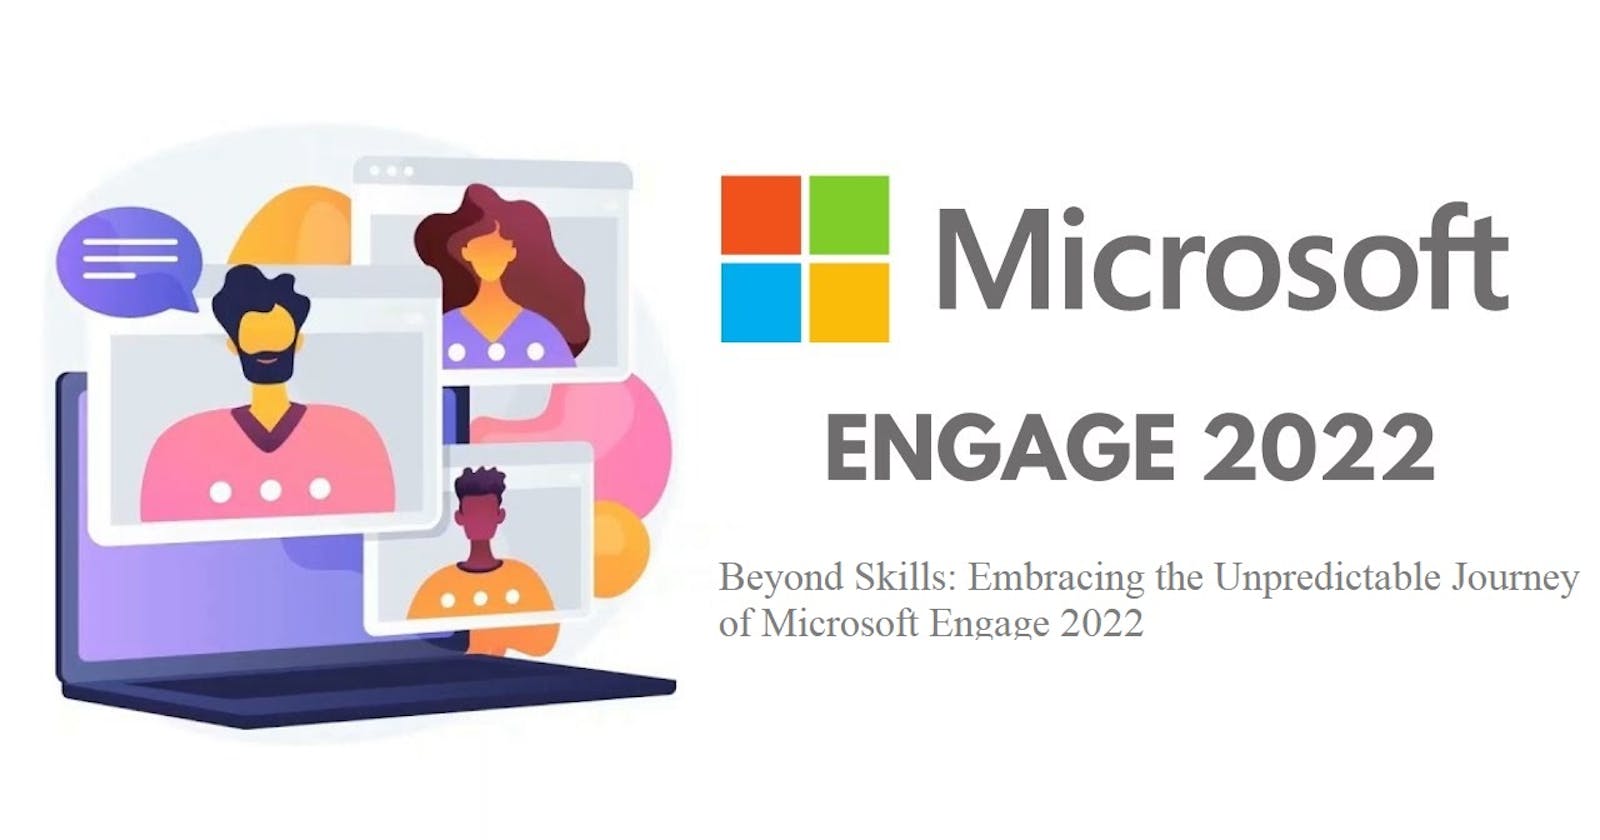 Beyond Skills: Embracing the Unpredictable Journey of Microsoft Engage 2022